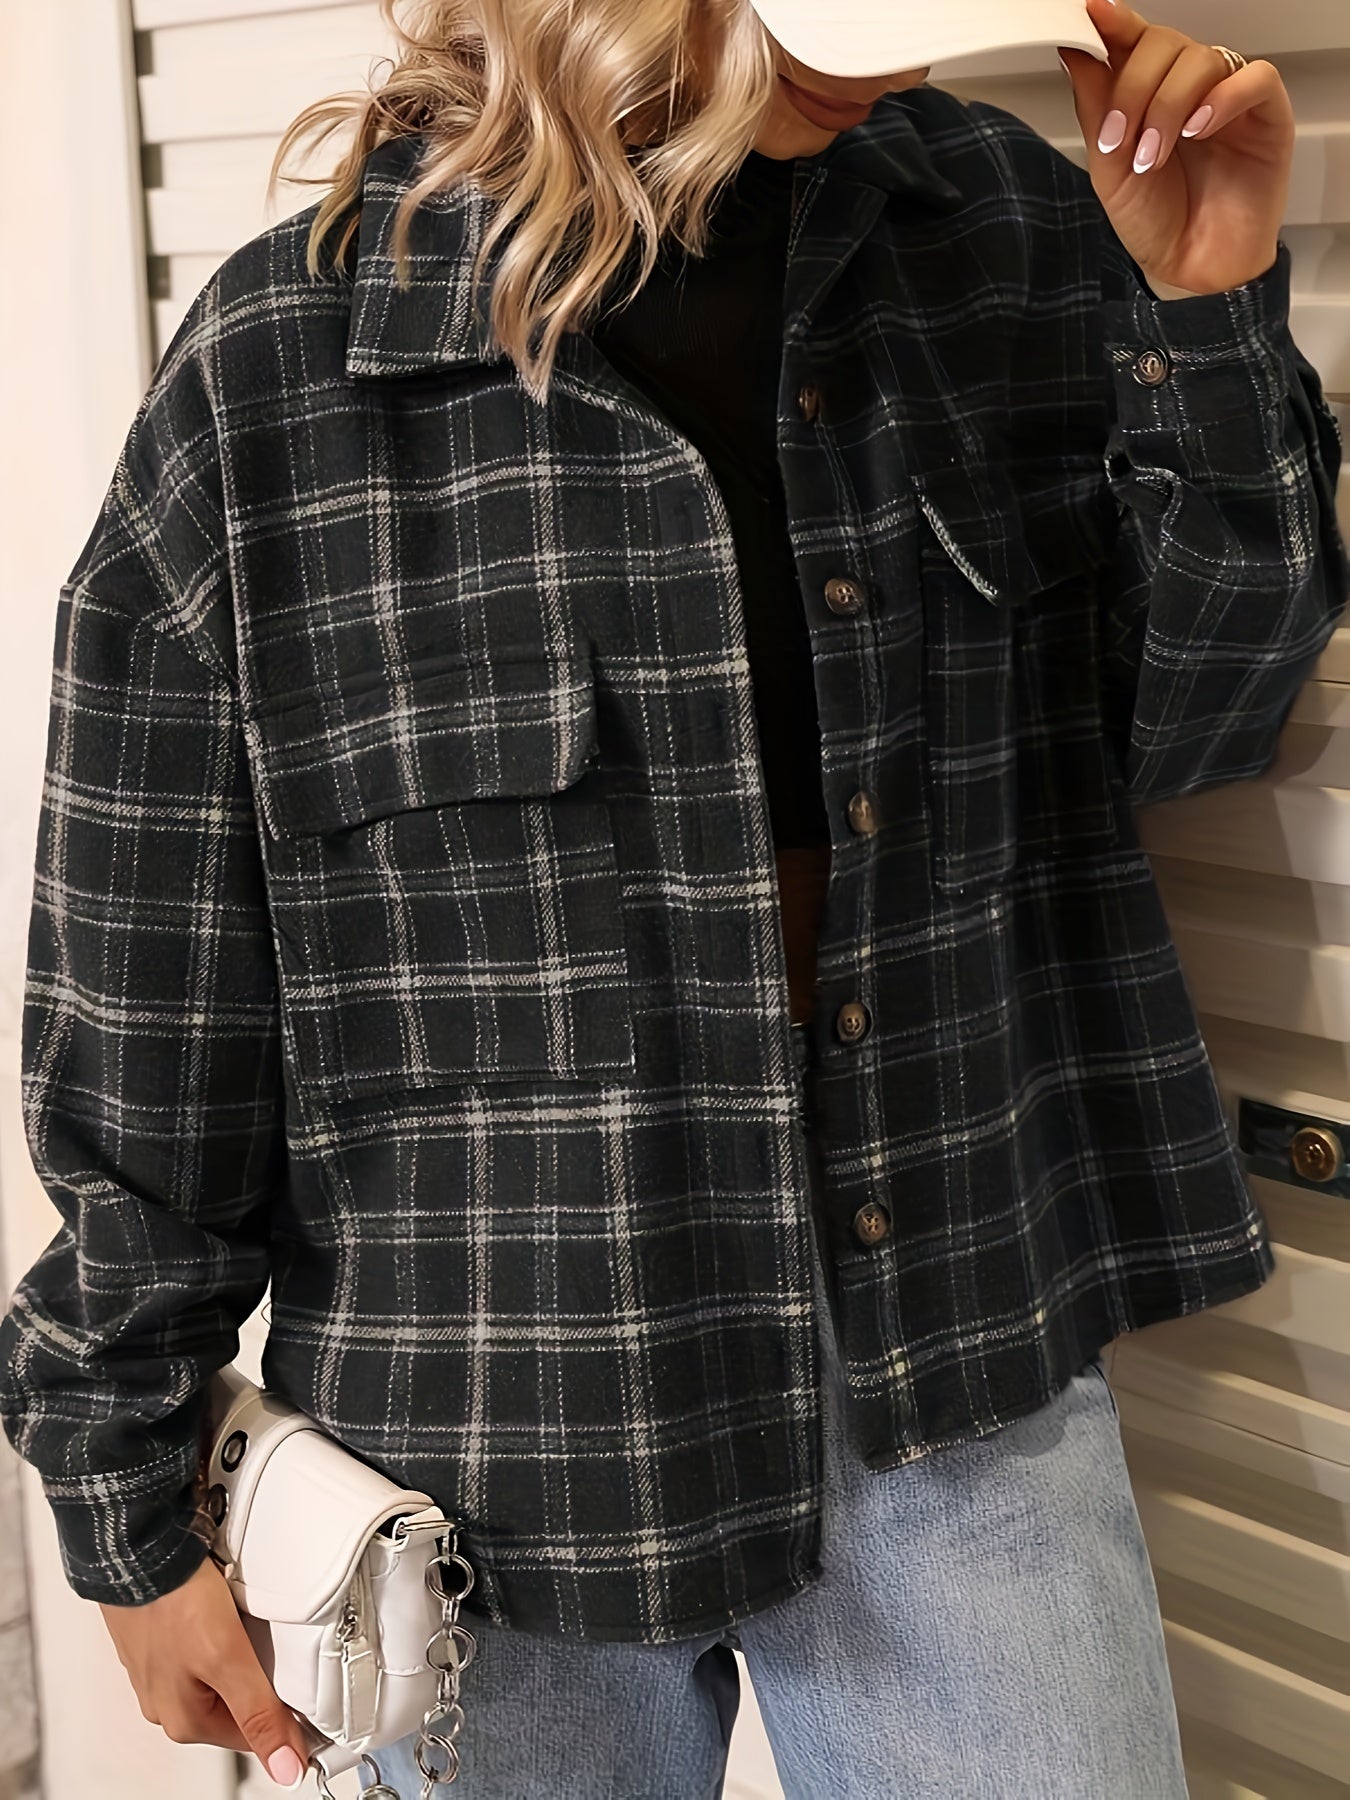 Antmvs Plus Size Casual Jacket, Women's Plus Plaid Print Long Sleeve Button Up Lapel Collar Jacket With Pockets